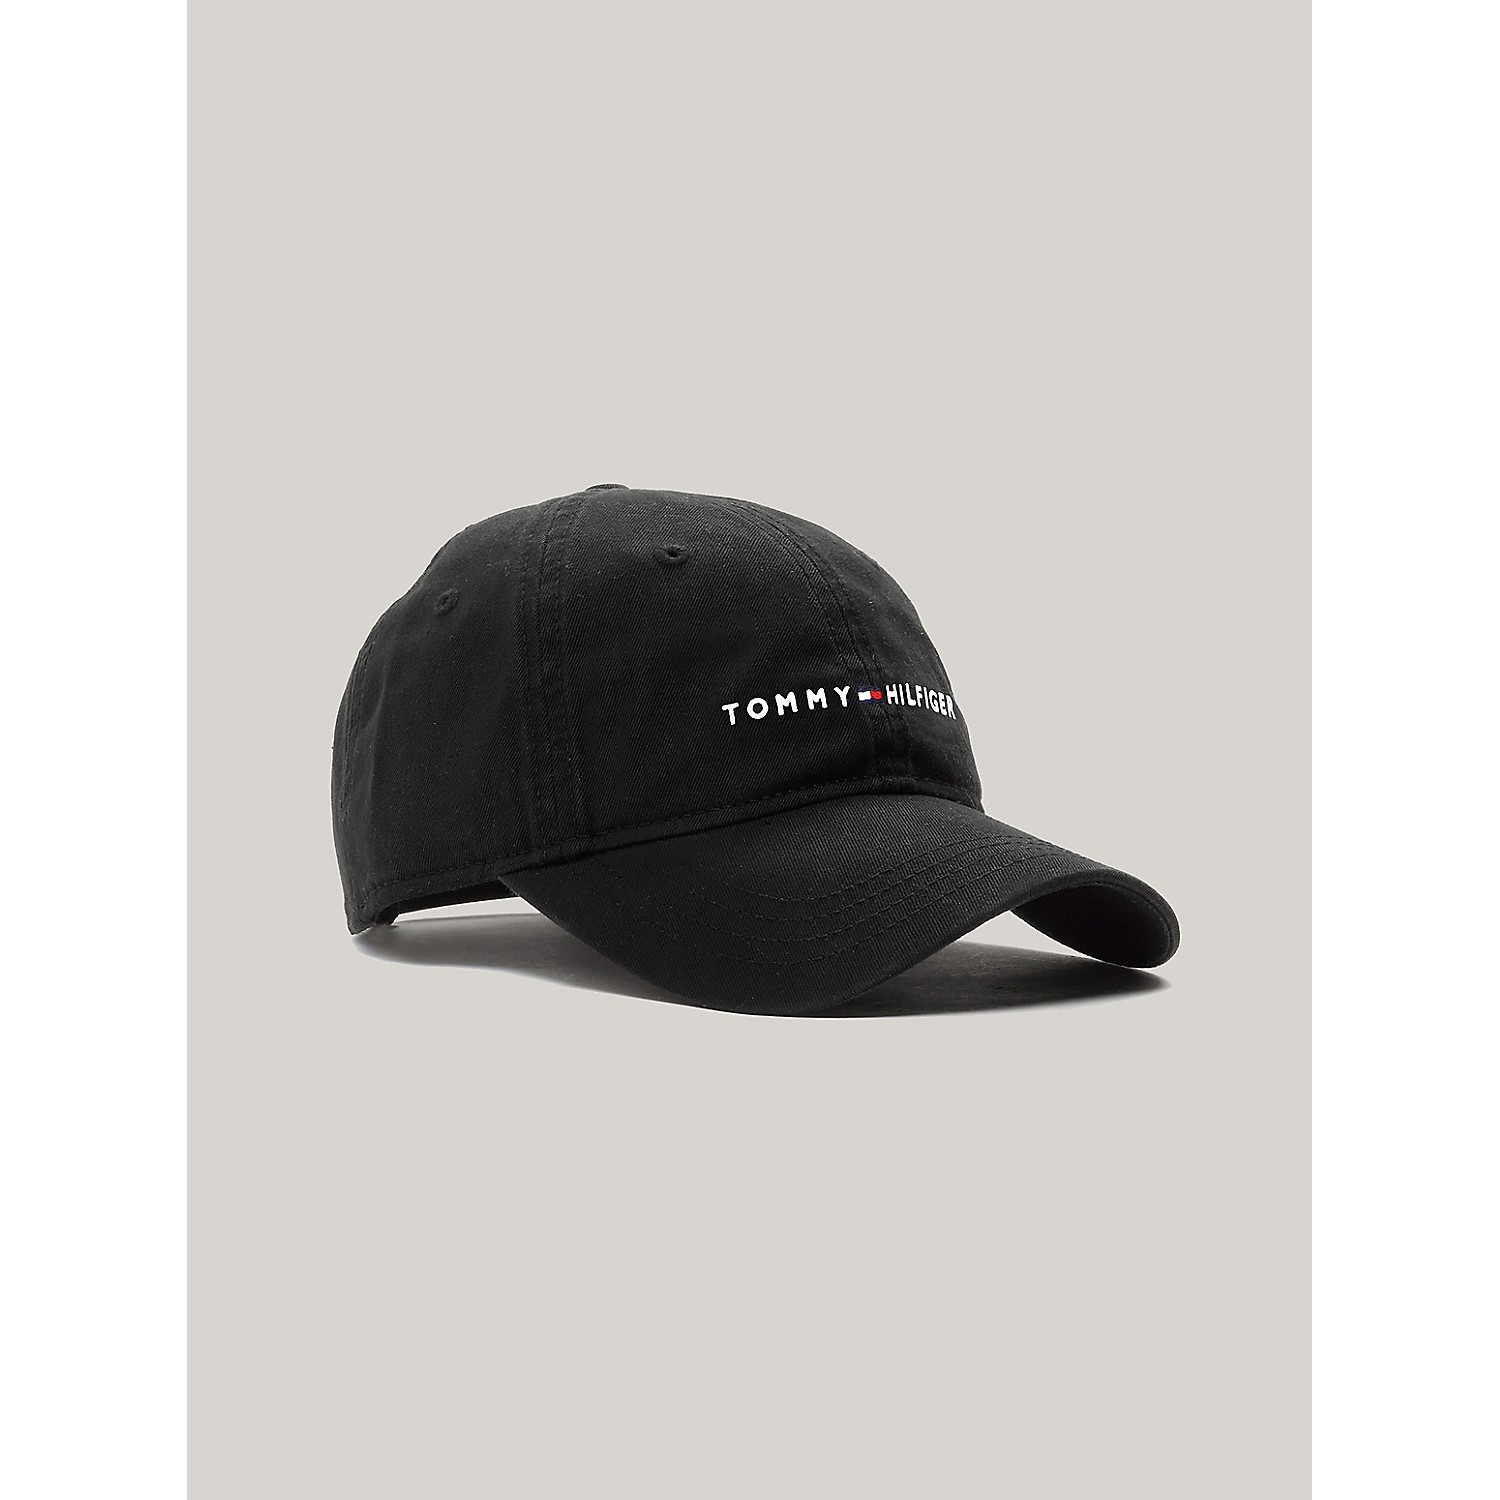 TOMMY HILFIGER Embroidered Tommy Logo Baseball Cap